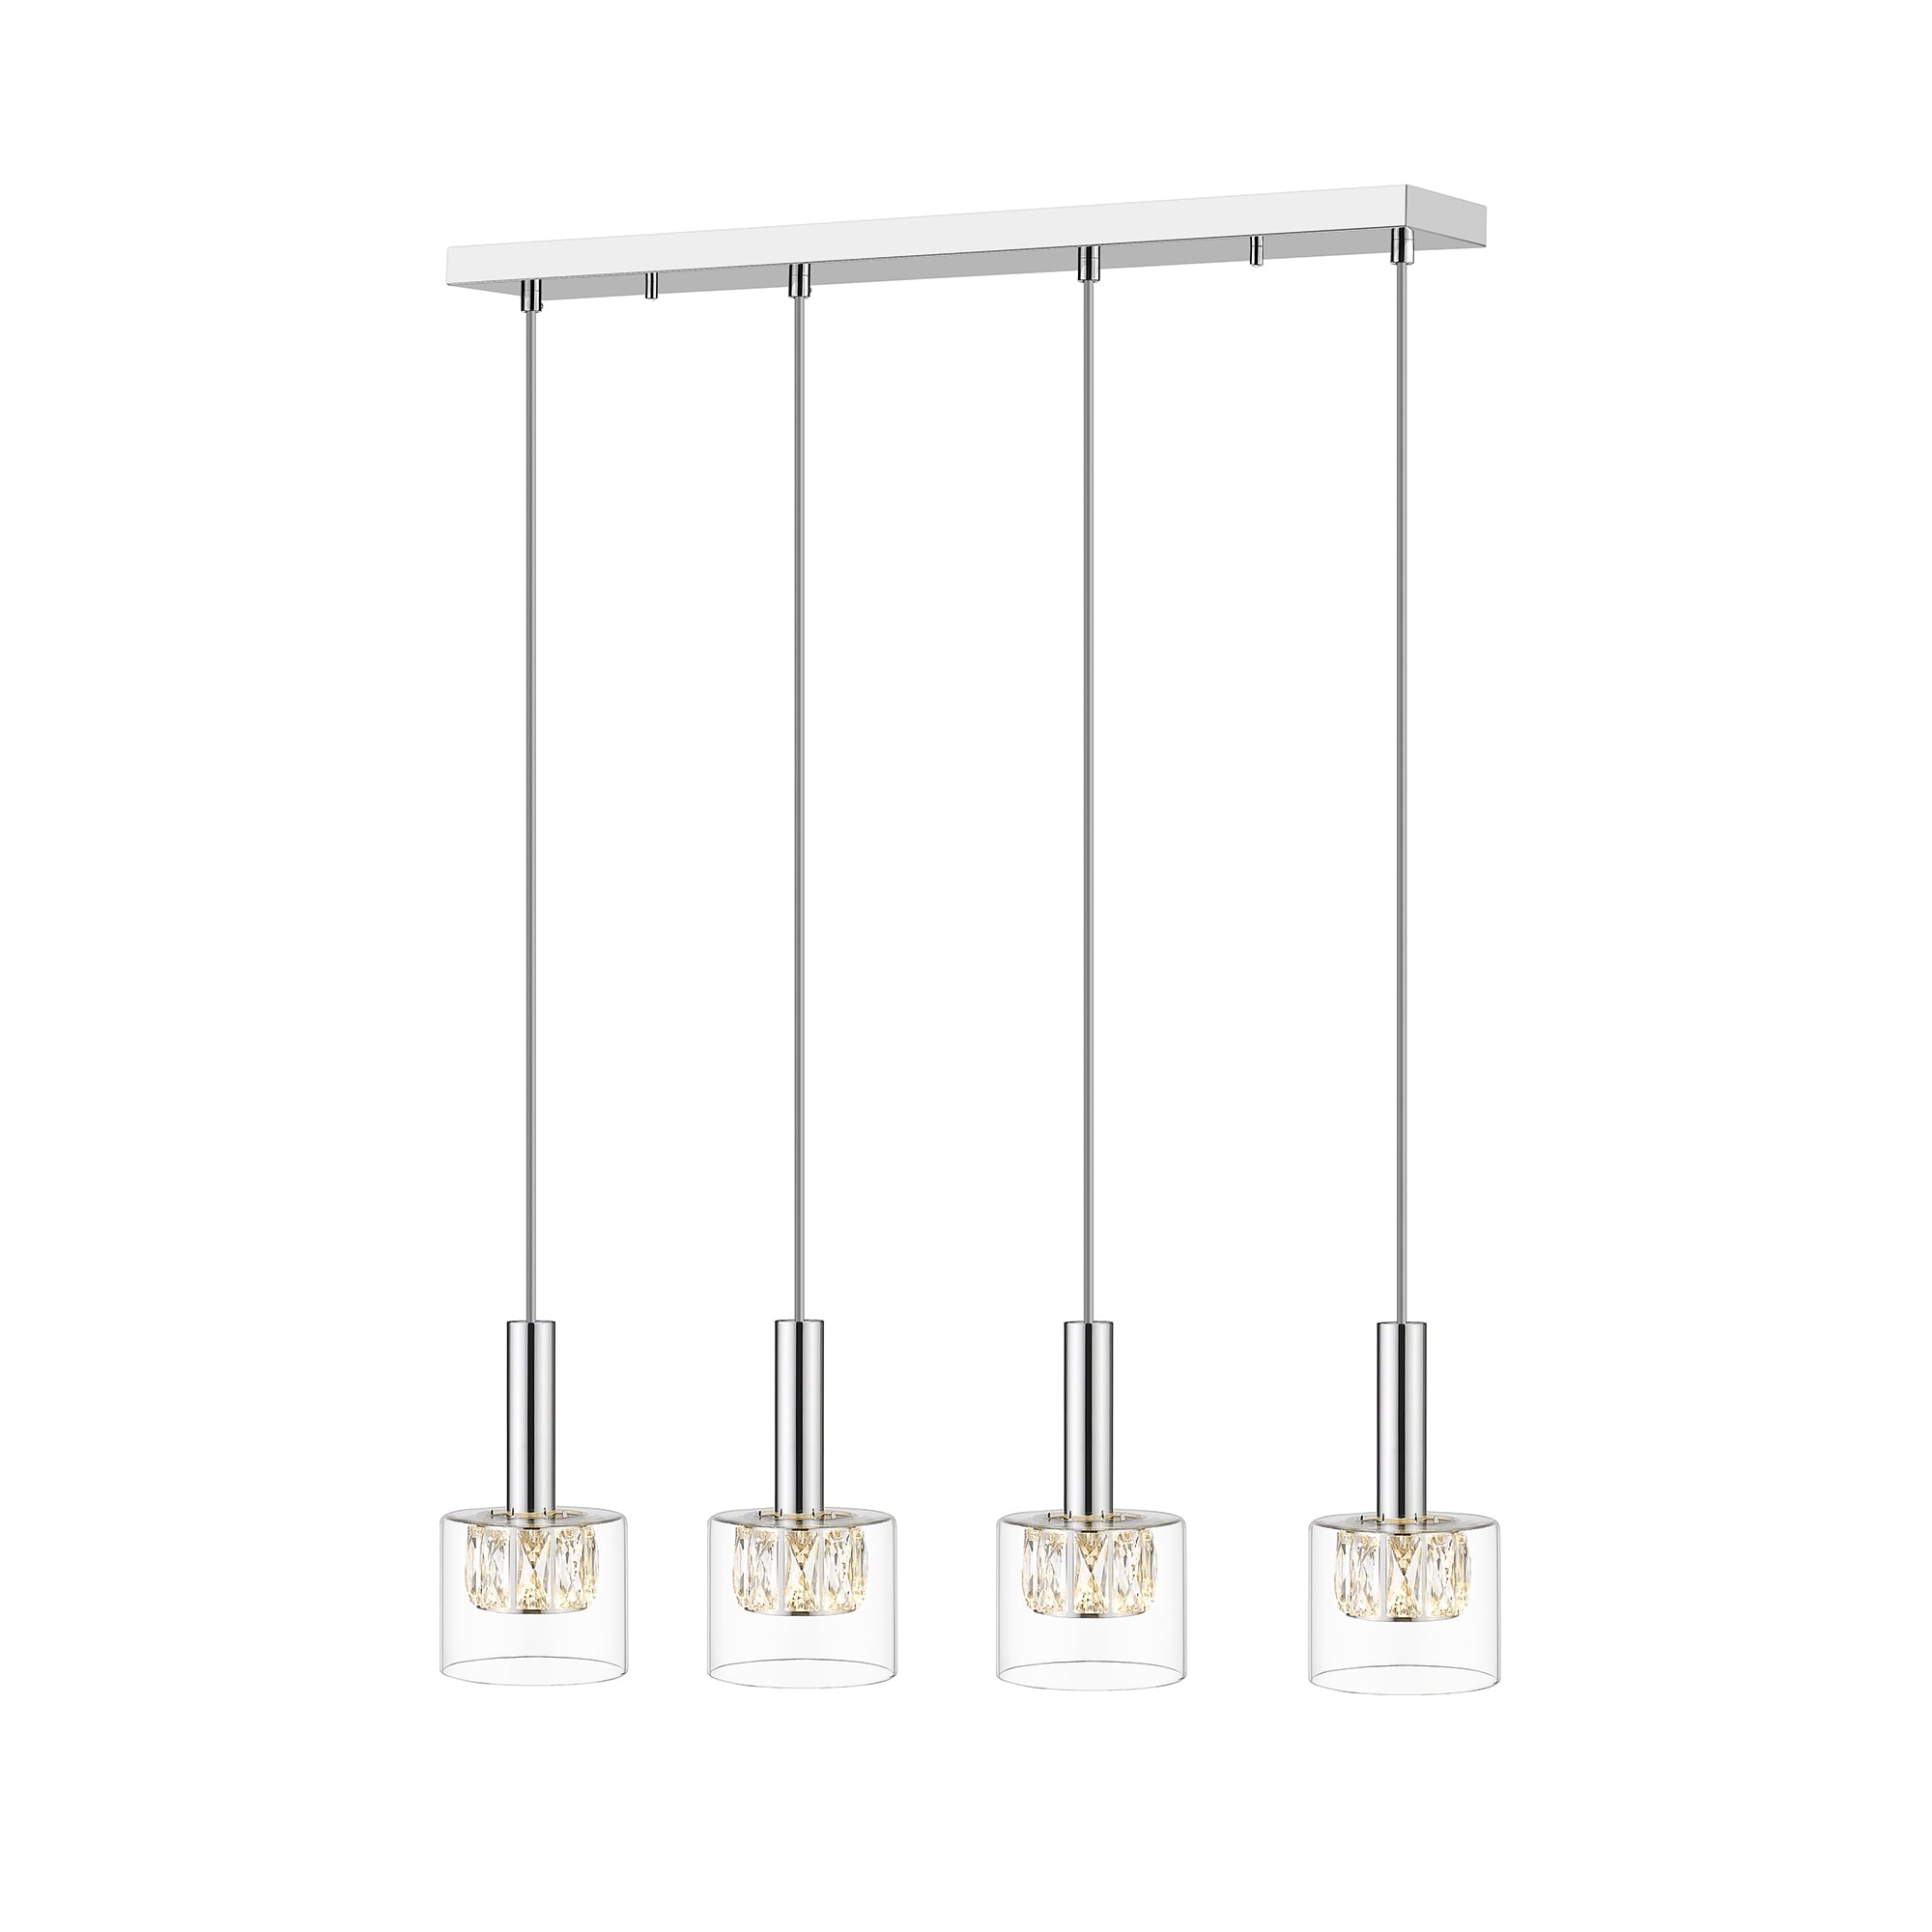 OVE Decors Cider IV LED Integrated Pendant with Mirror finish 8.69 in H  Bed Bath  Beyond 30925638